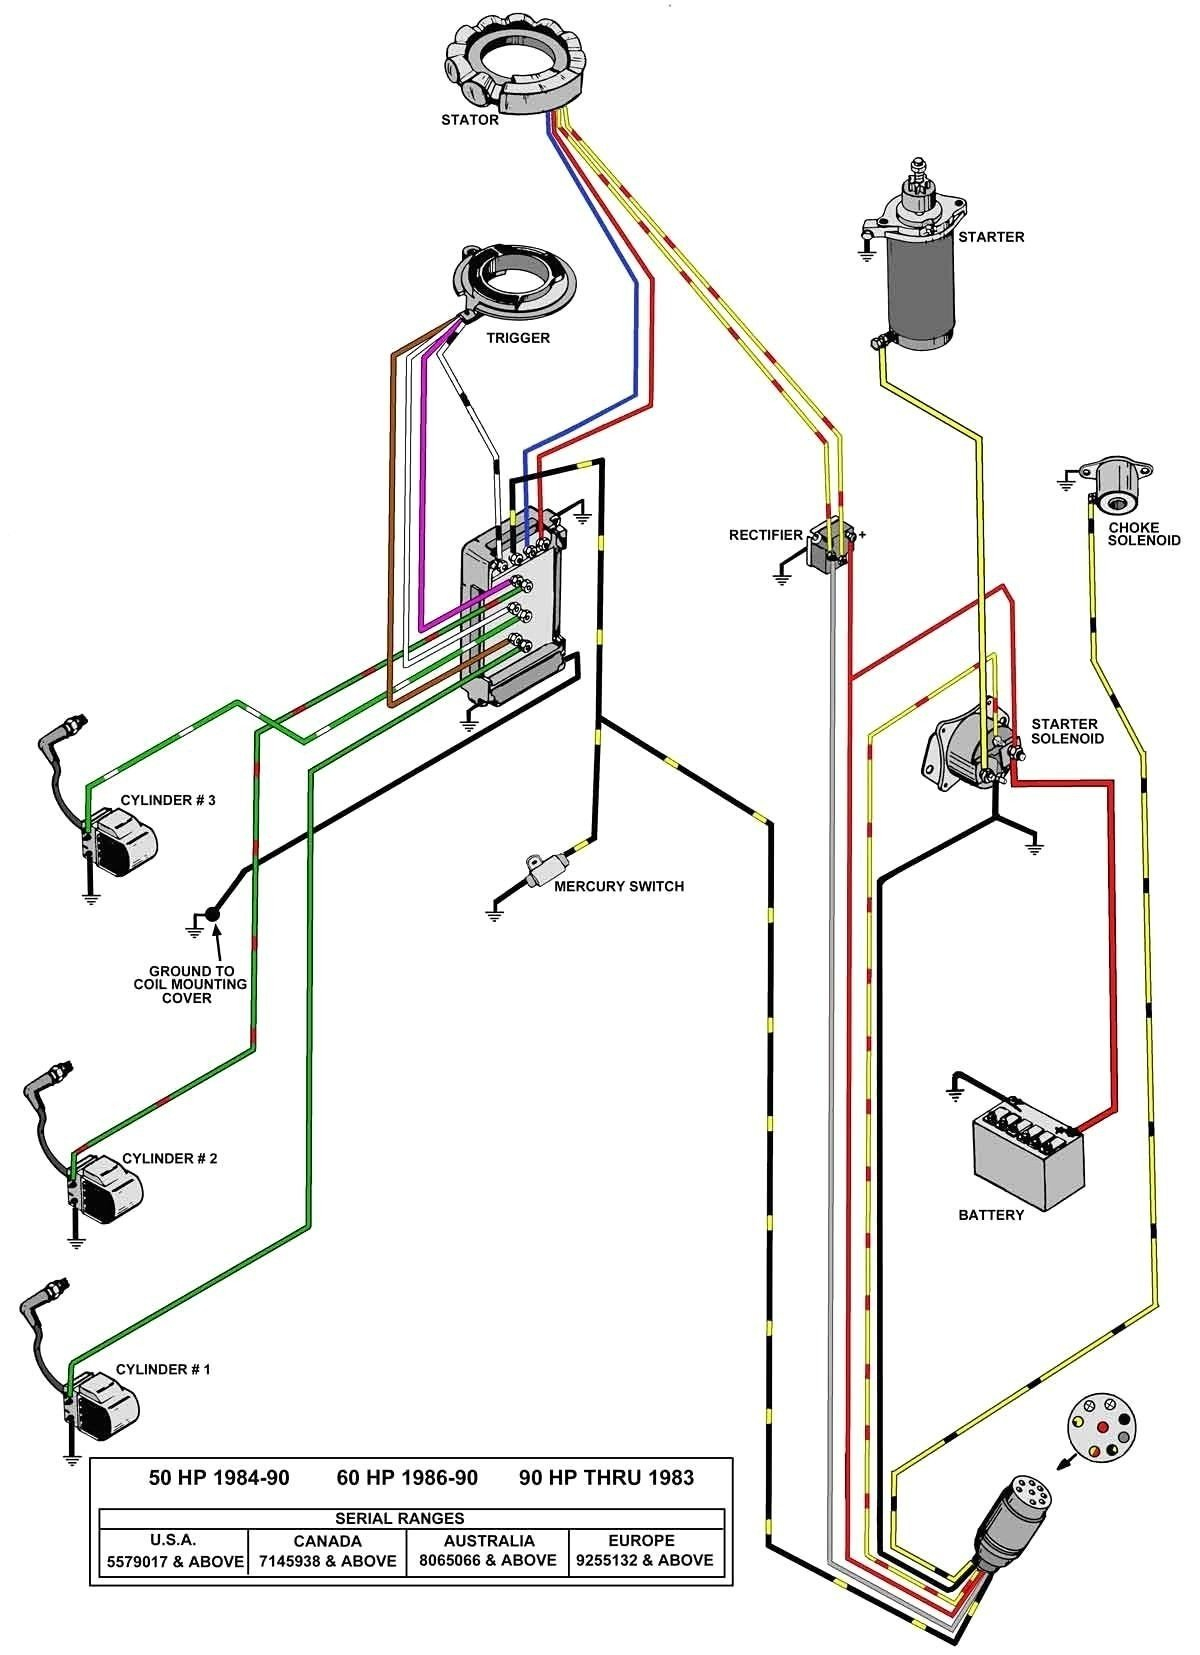 40 Hp Mercury Outboard Wiring Diagram Hecho | Wiring Diagram - Mercury Outboard Rectifier Wiring Diagram